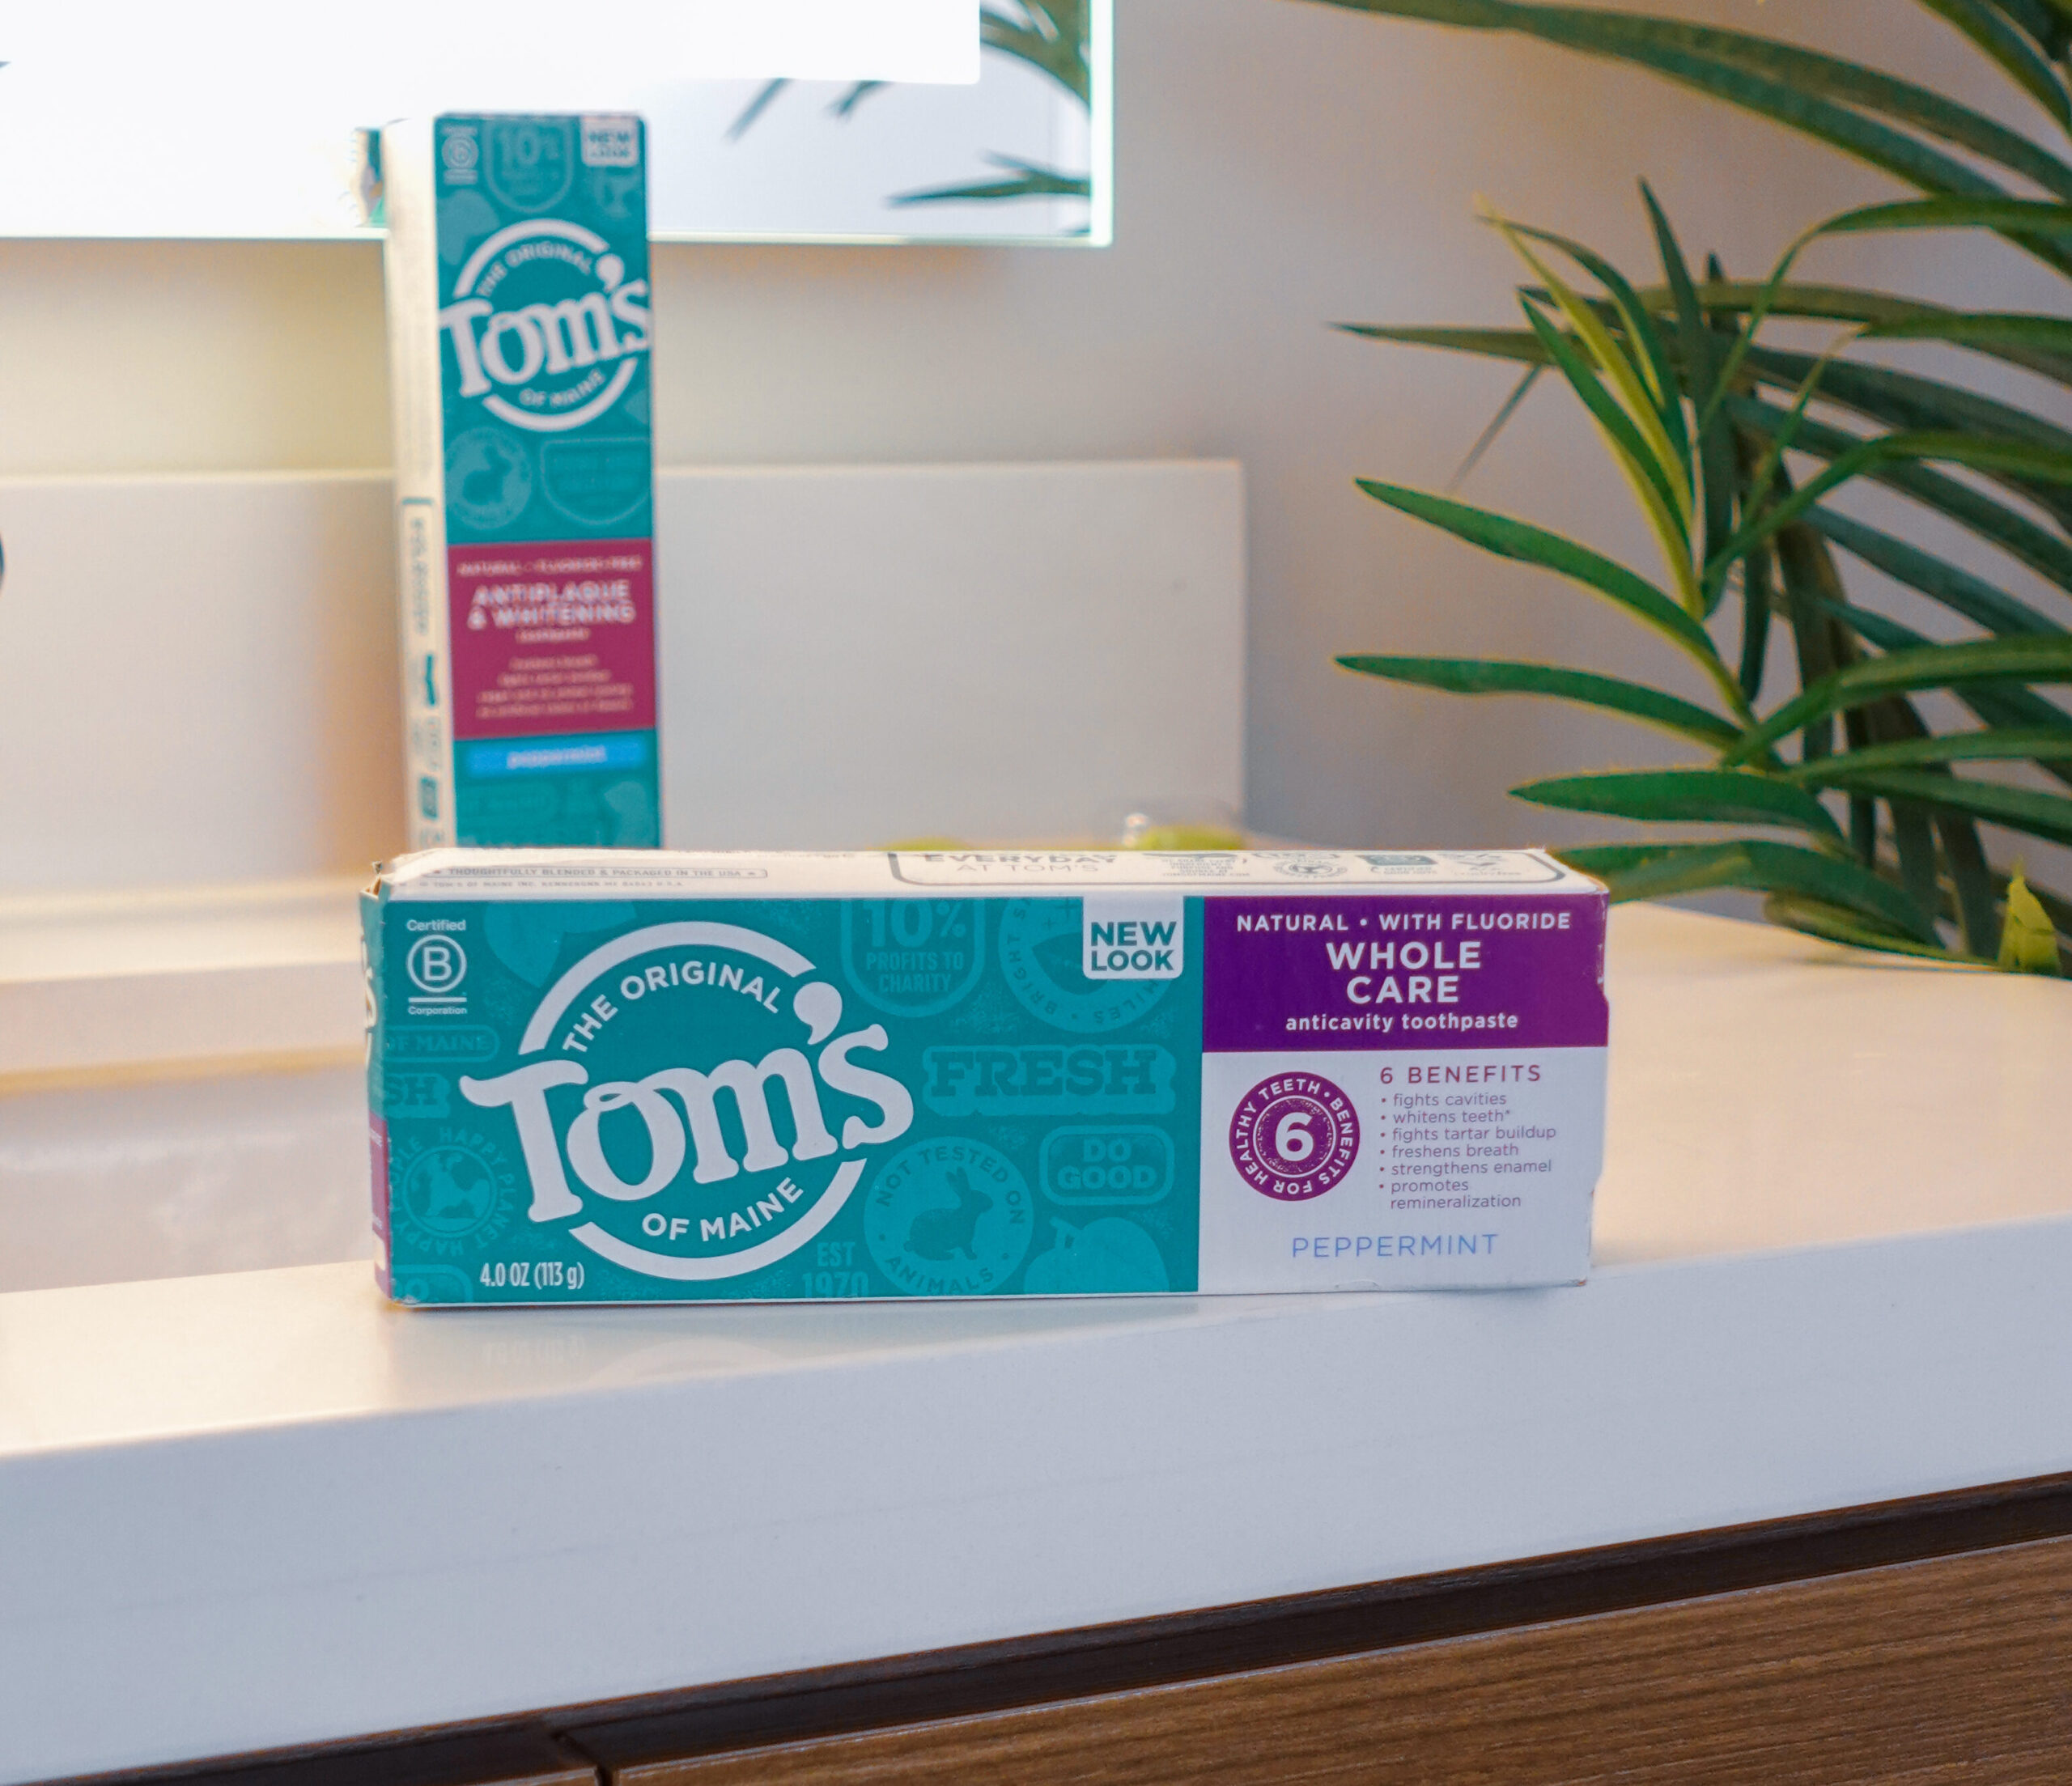 If you're looking for an all-in-one solution to fight cavities, plaque, and tartar buildup, the Tom's of Maine Whole Care toothpaste is a great option. Tom's of maine toothpaste